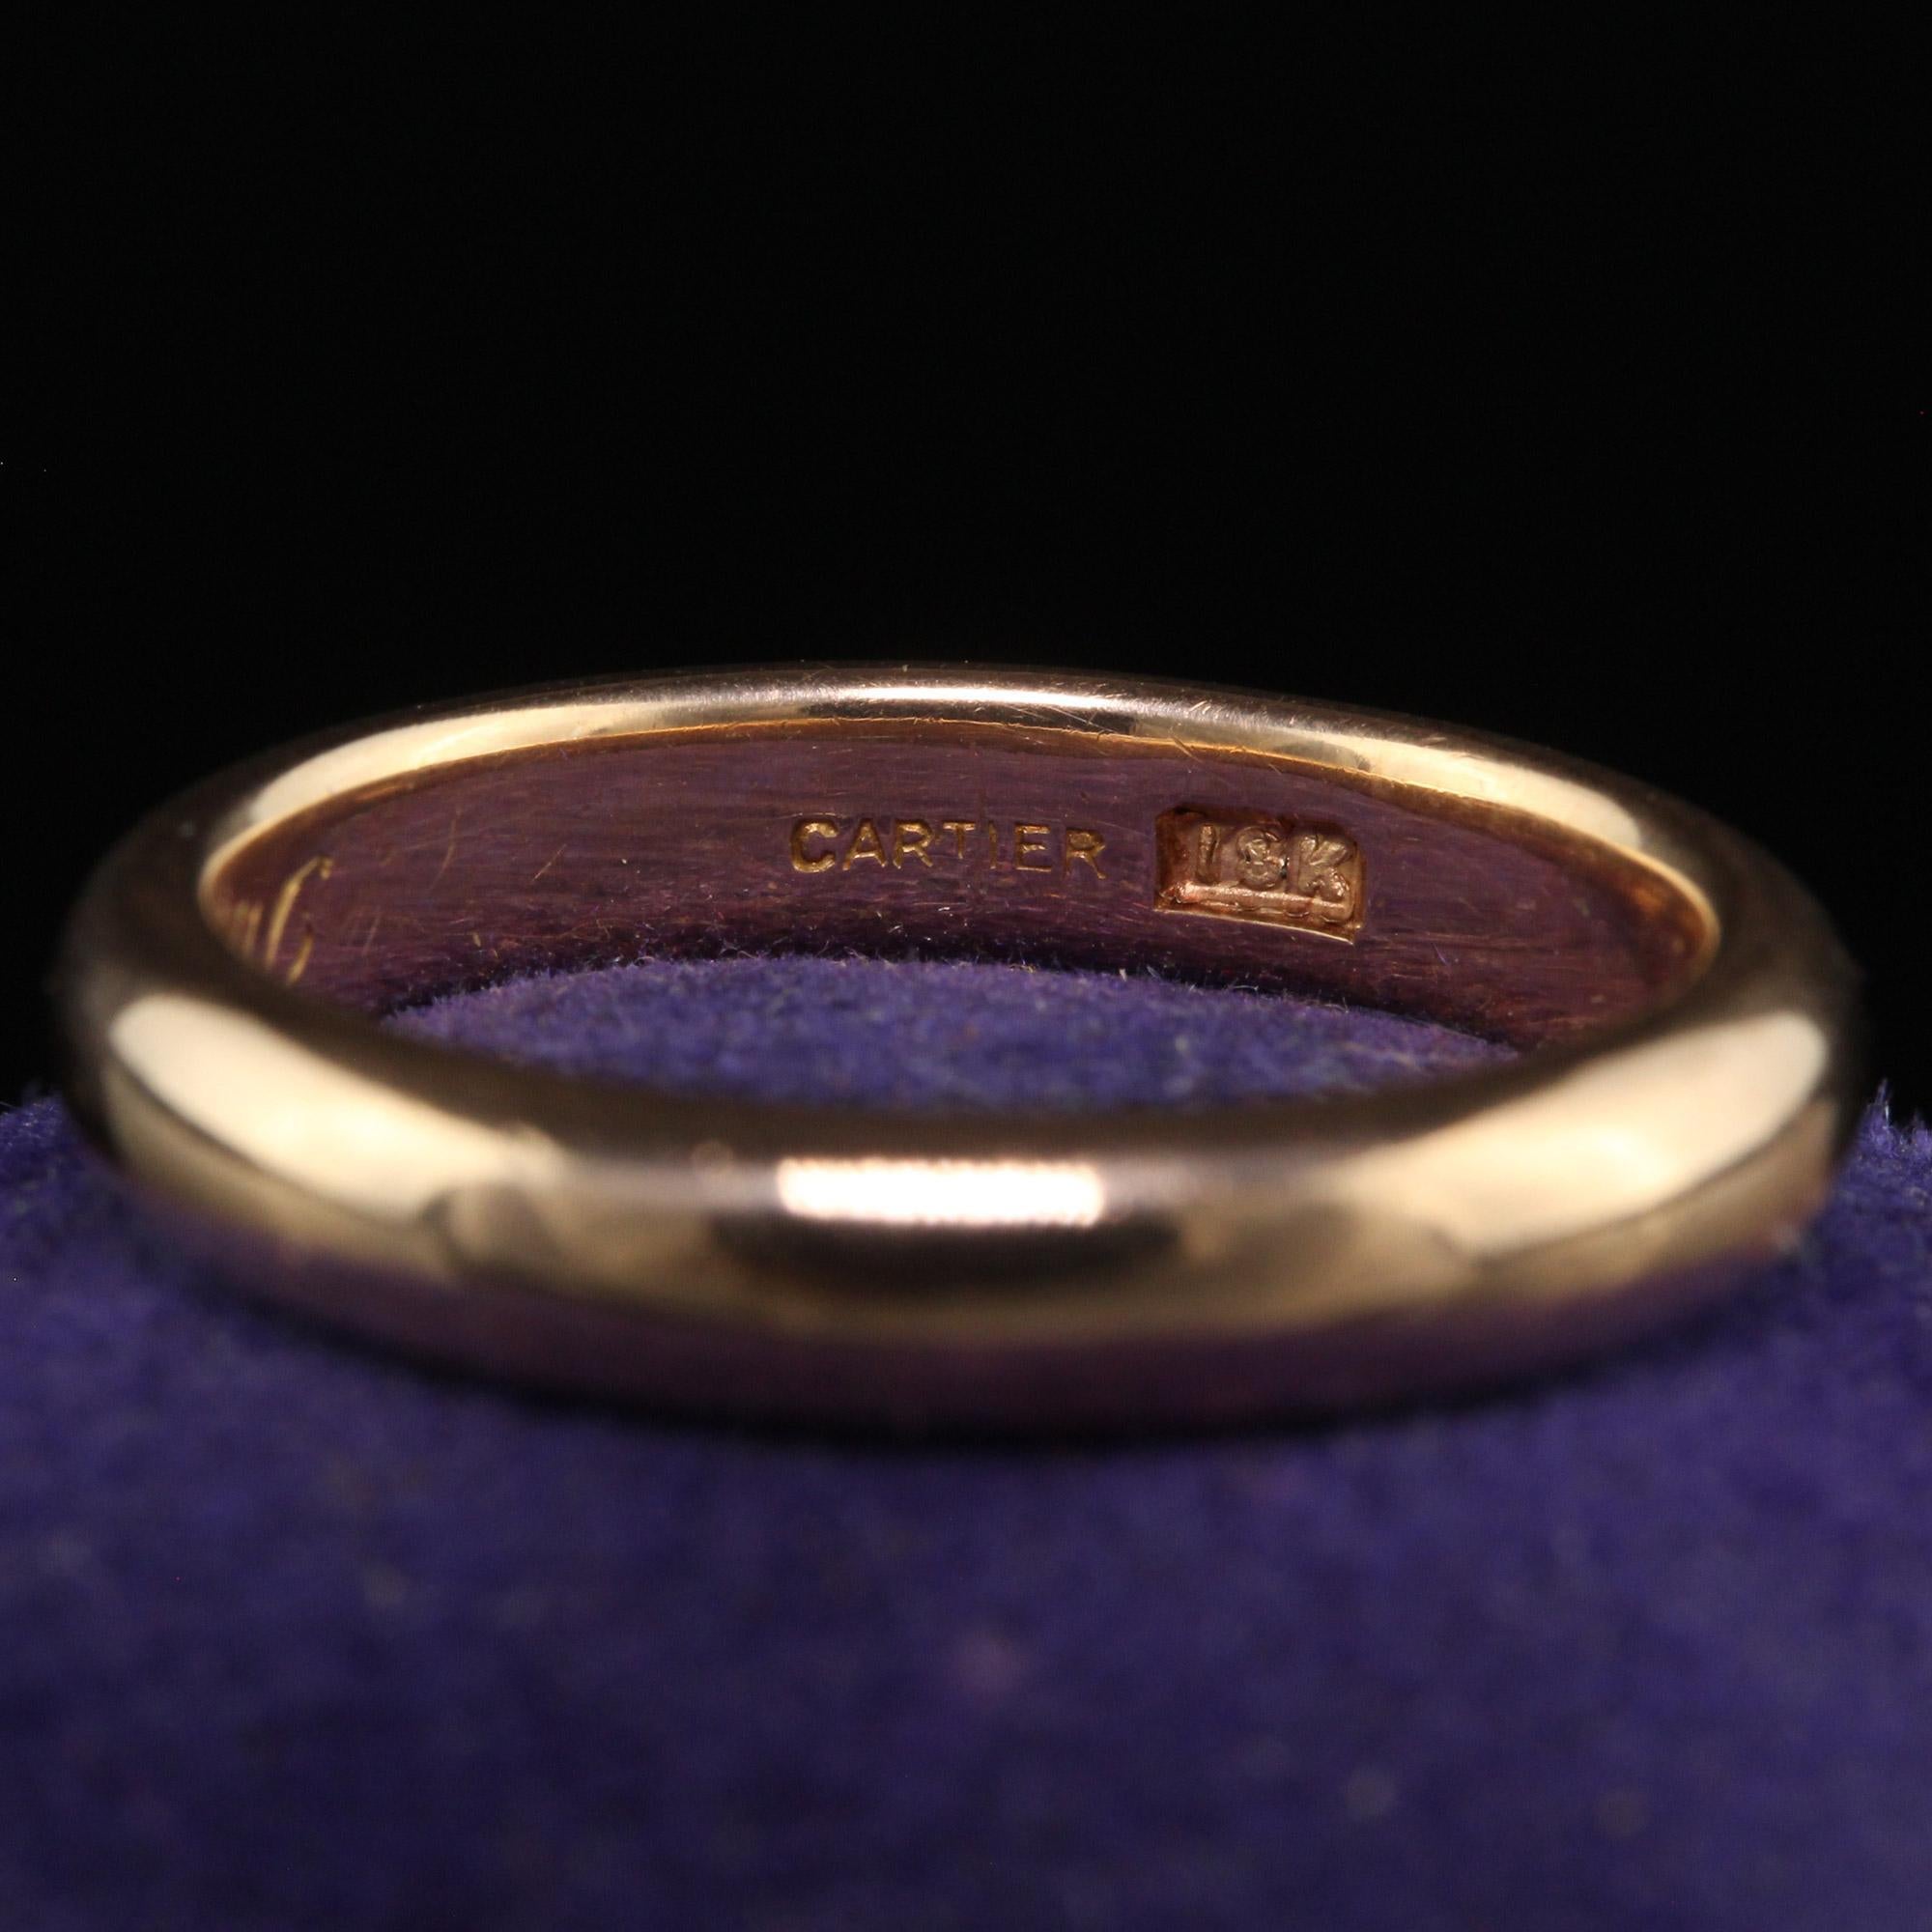 Estate Retro Cartier 18K Rose Gold Classic Thick Wedding Band - Size 7 In Good Condition For Sale In Great Neck, NY